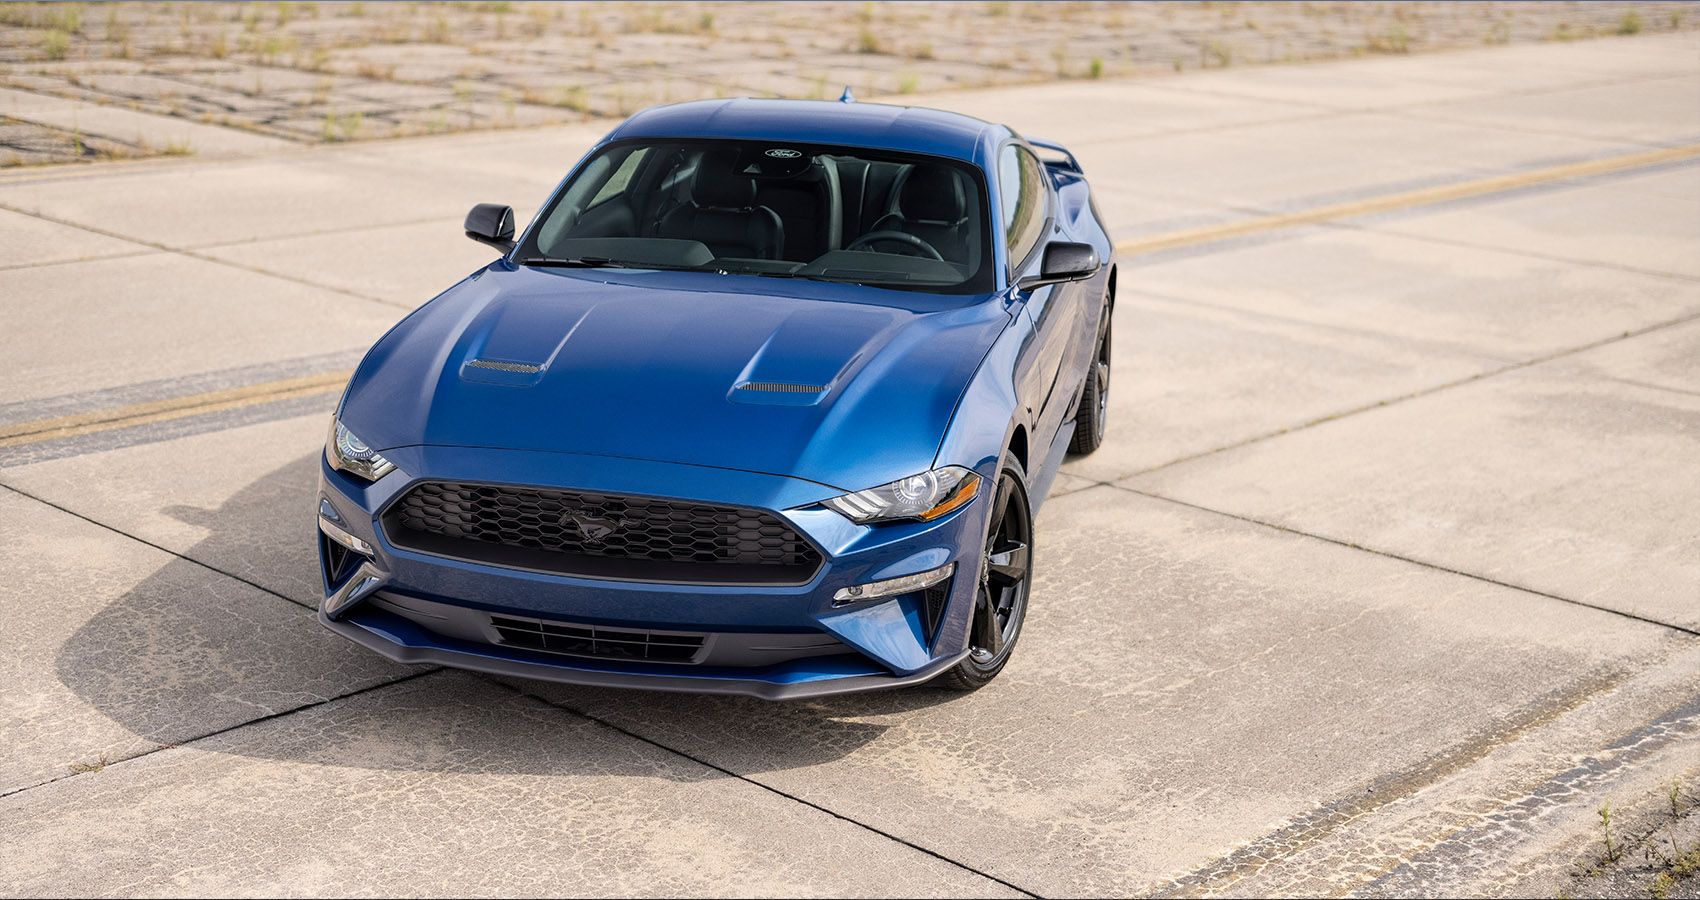 The front of the 2022 Mustang Stealth Edition Package